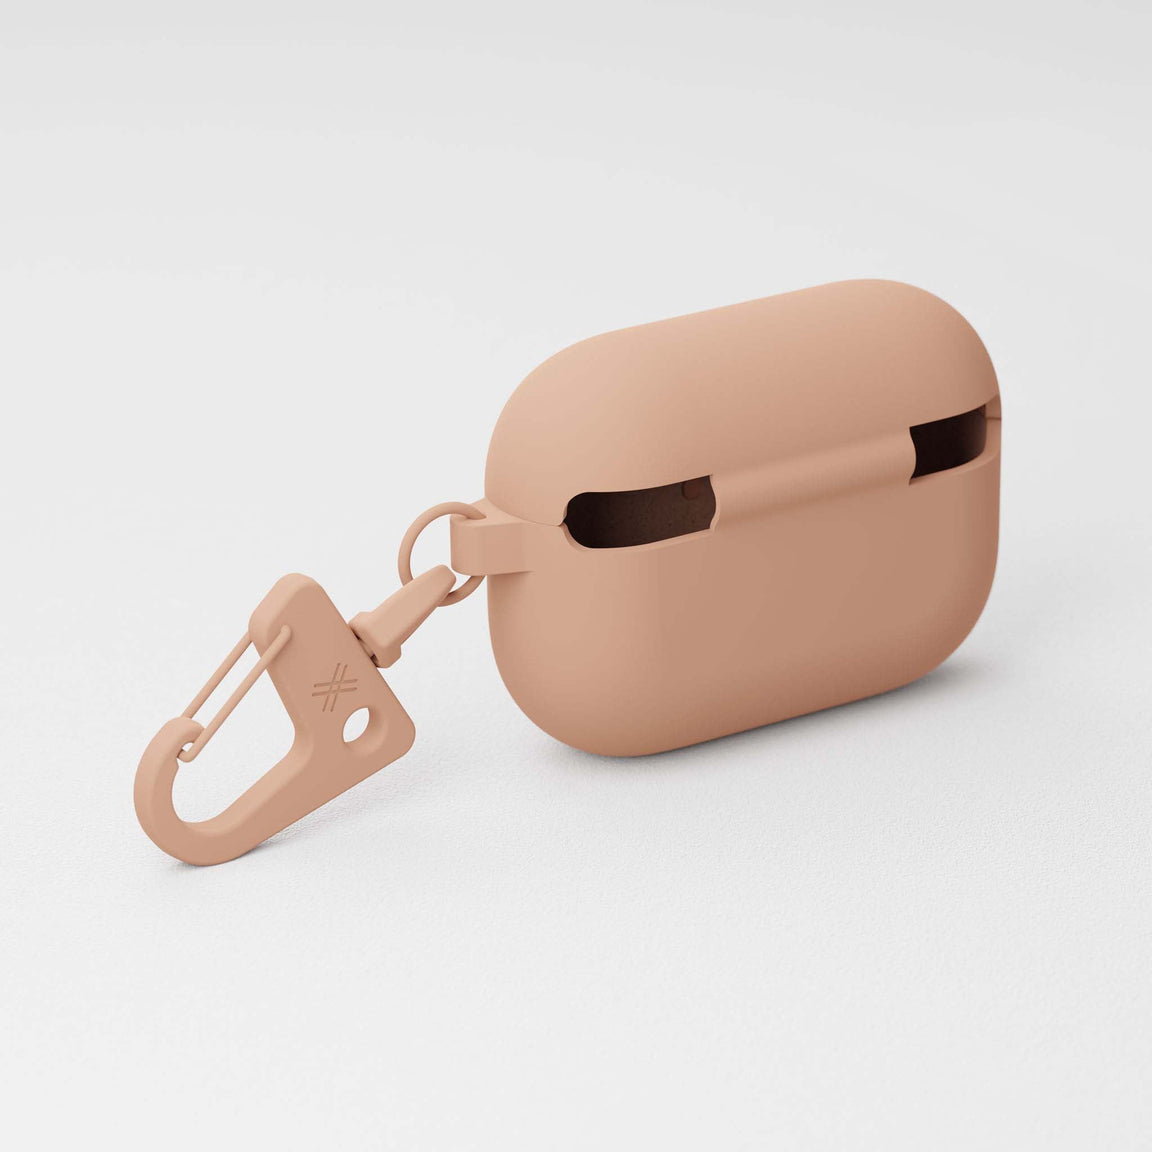 AirPods case Pro with matching carabiner in Powder Pink | XOUXOU